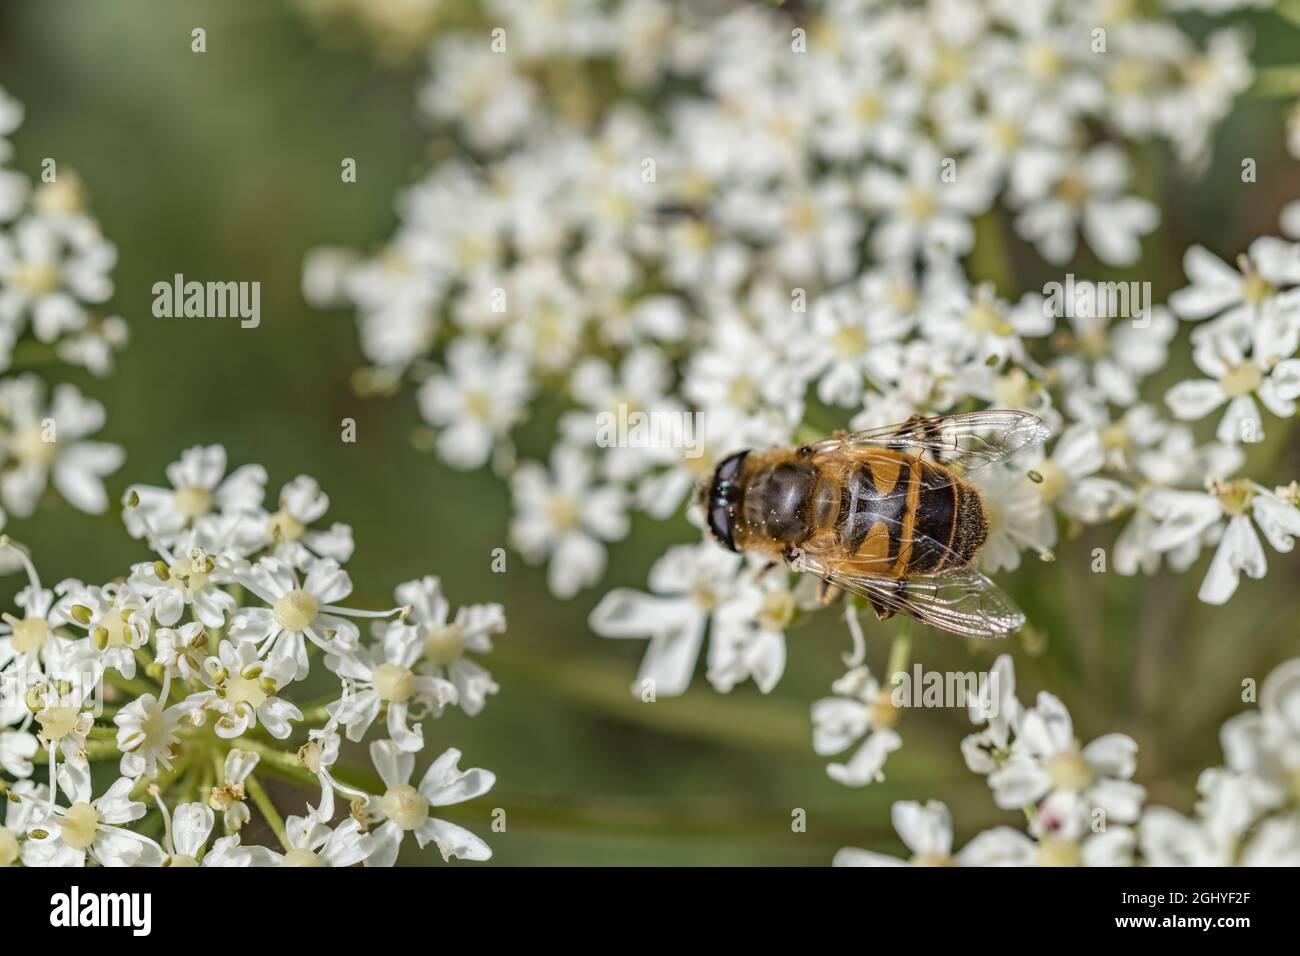 UK hoverfly on Umbellifer flowers: thought to be male Eristalis tenax, or possibly pertinax. Common summertime fly / flying insect. Stock Photo